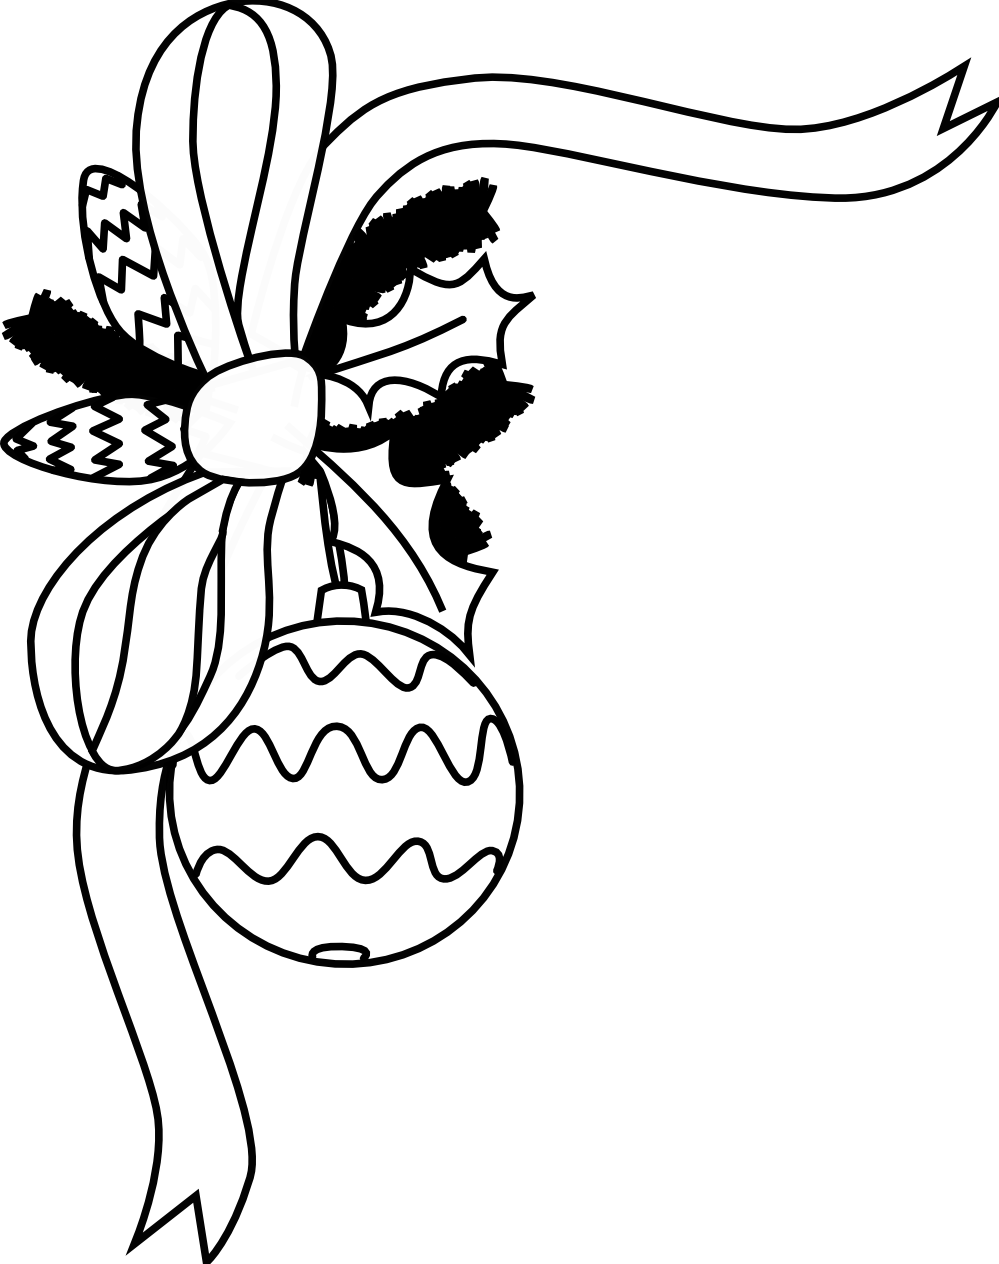 Holly clipart drawing. Christmas ornament black and